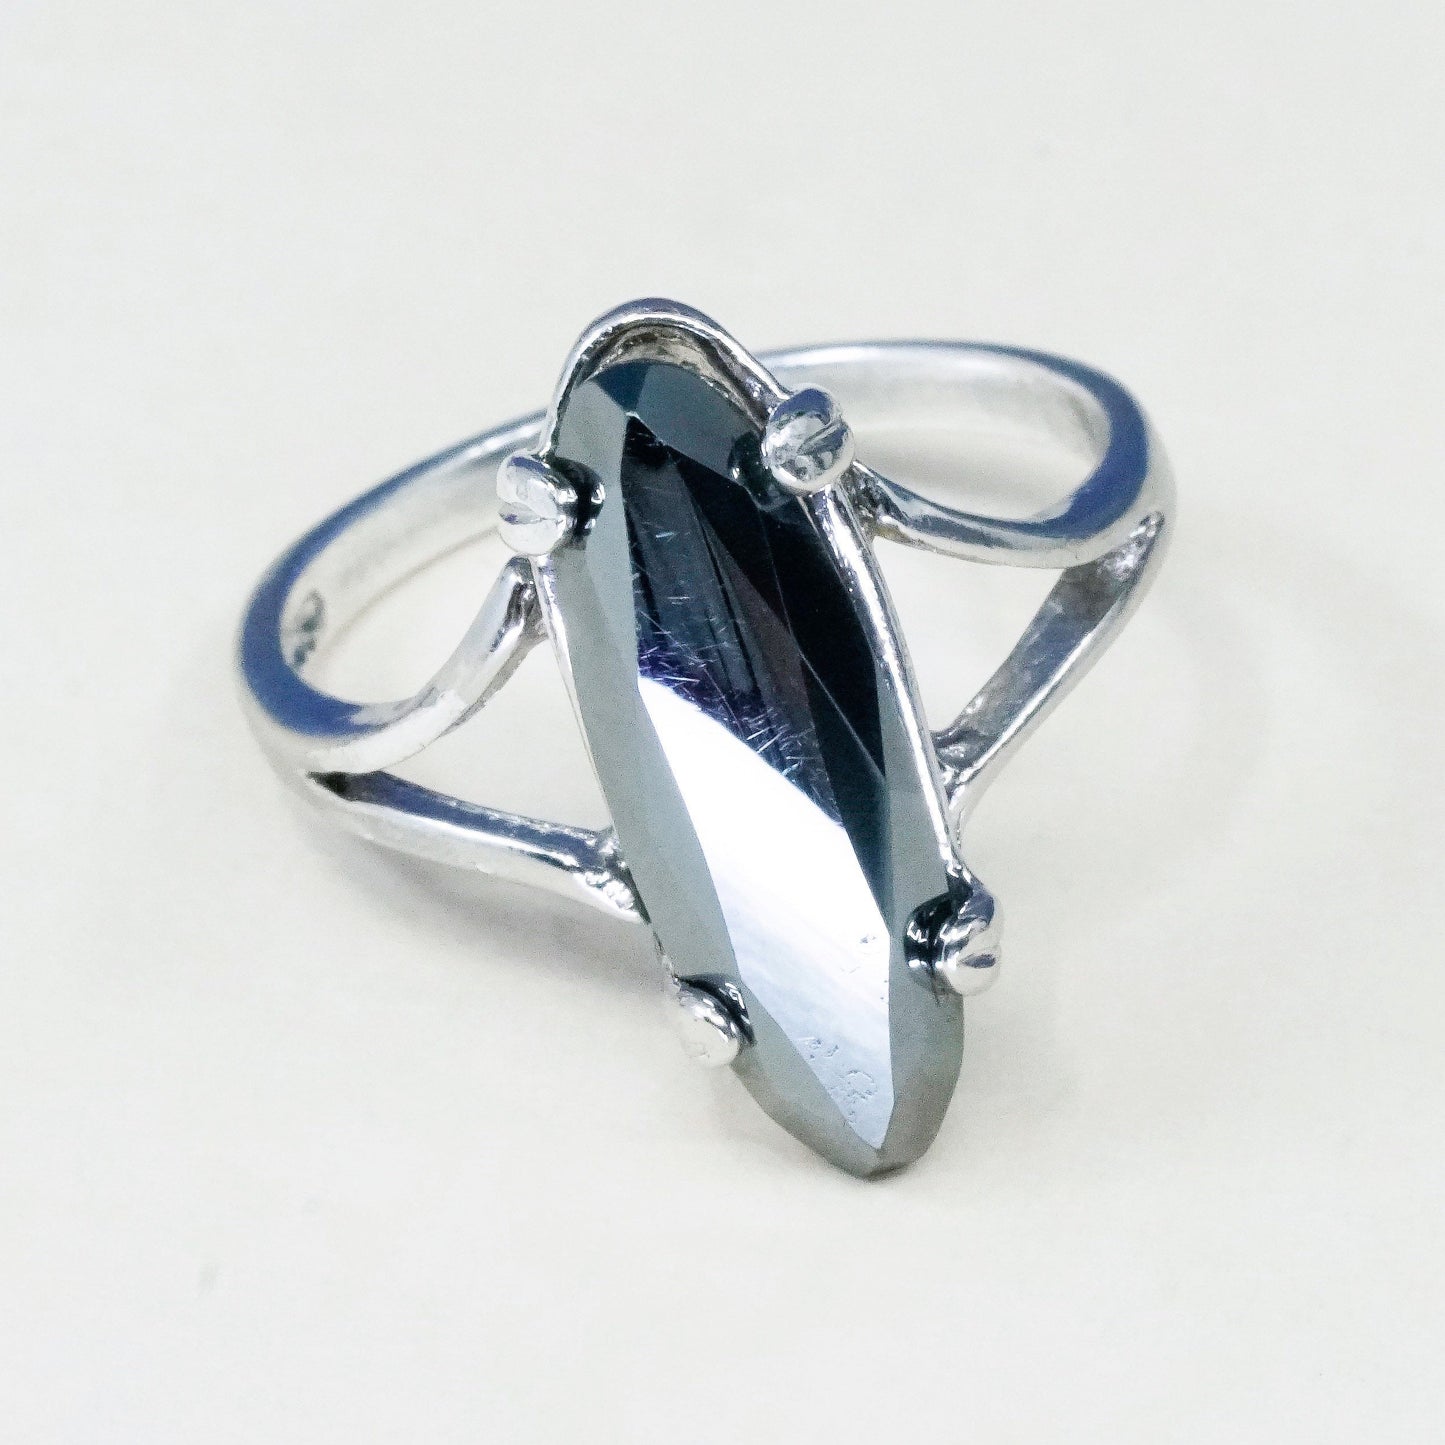 Size 6, vtg sterling 925 silver handmade ring with Marquise shaped hematite